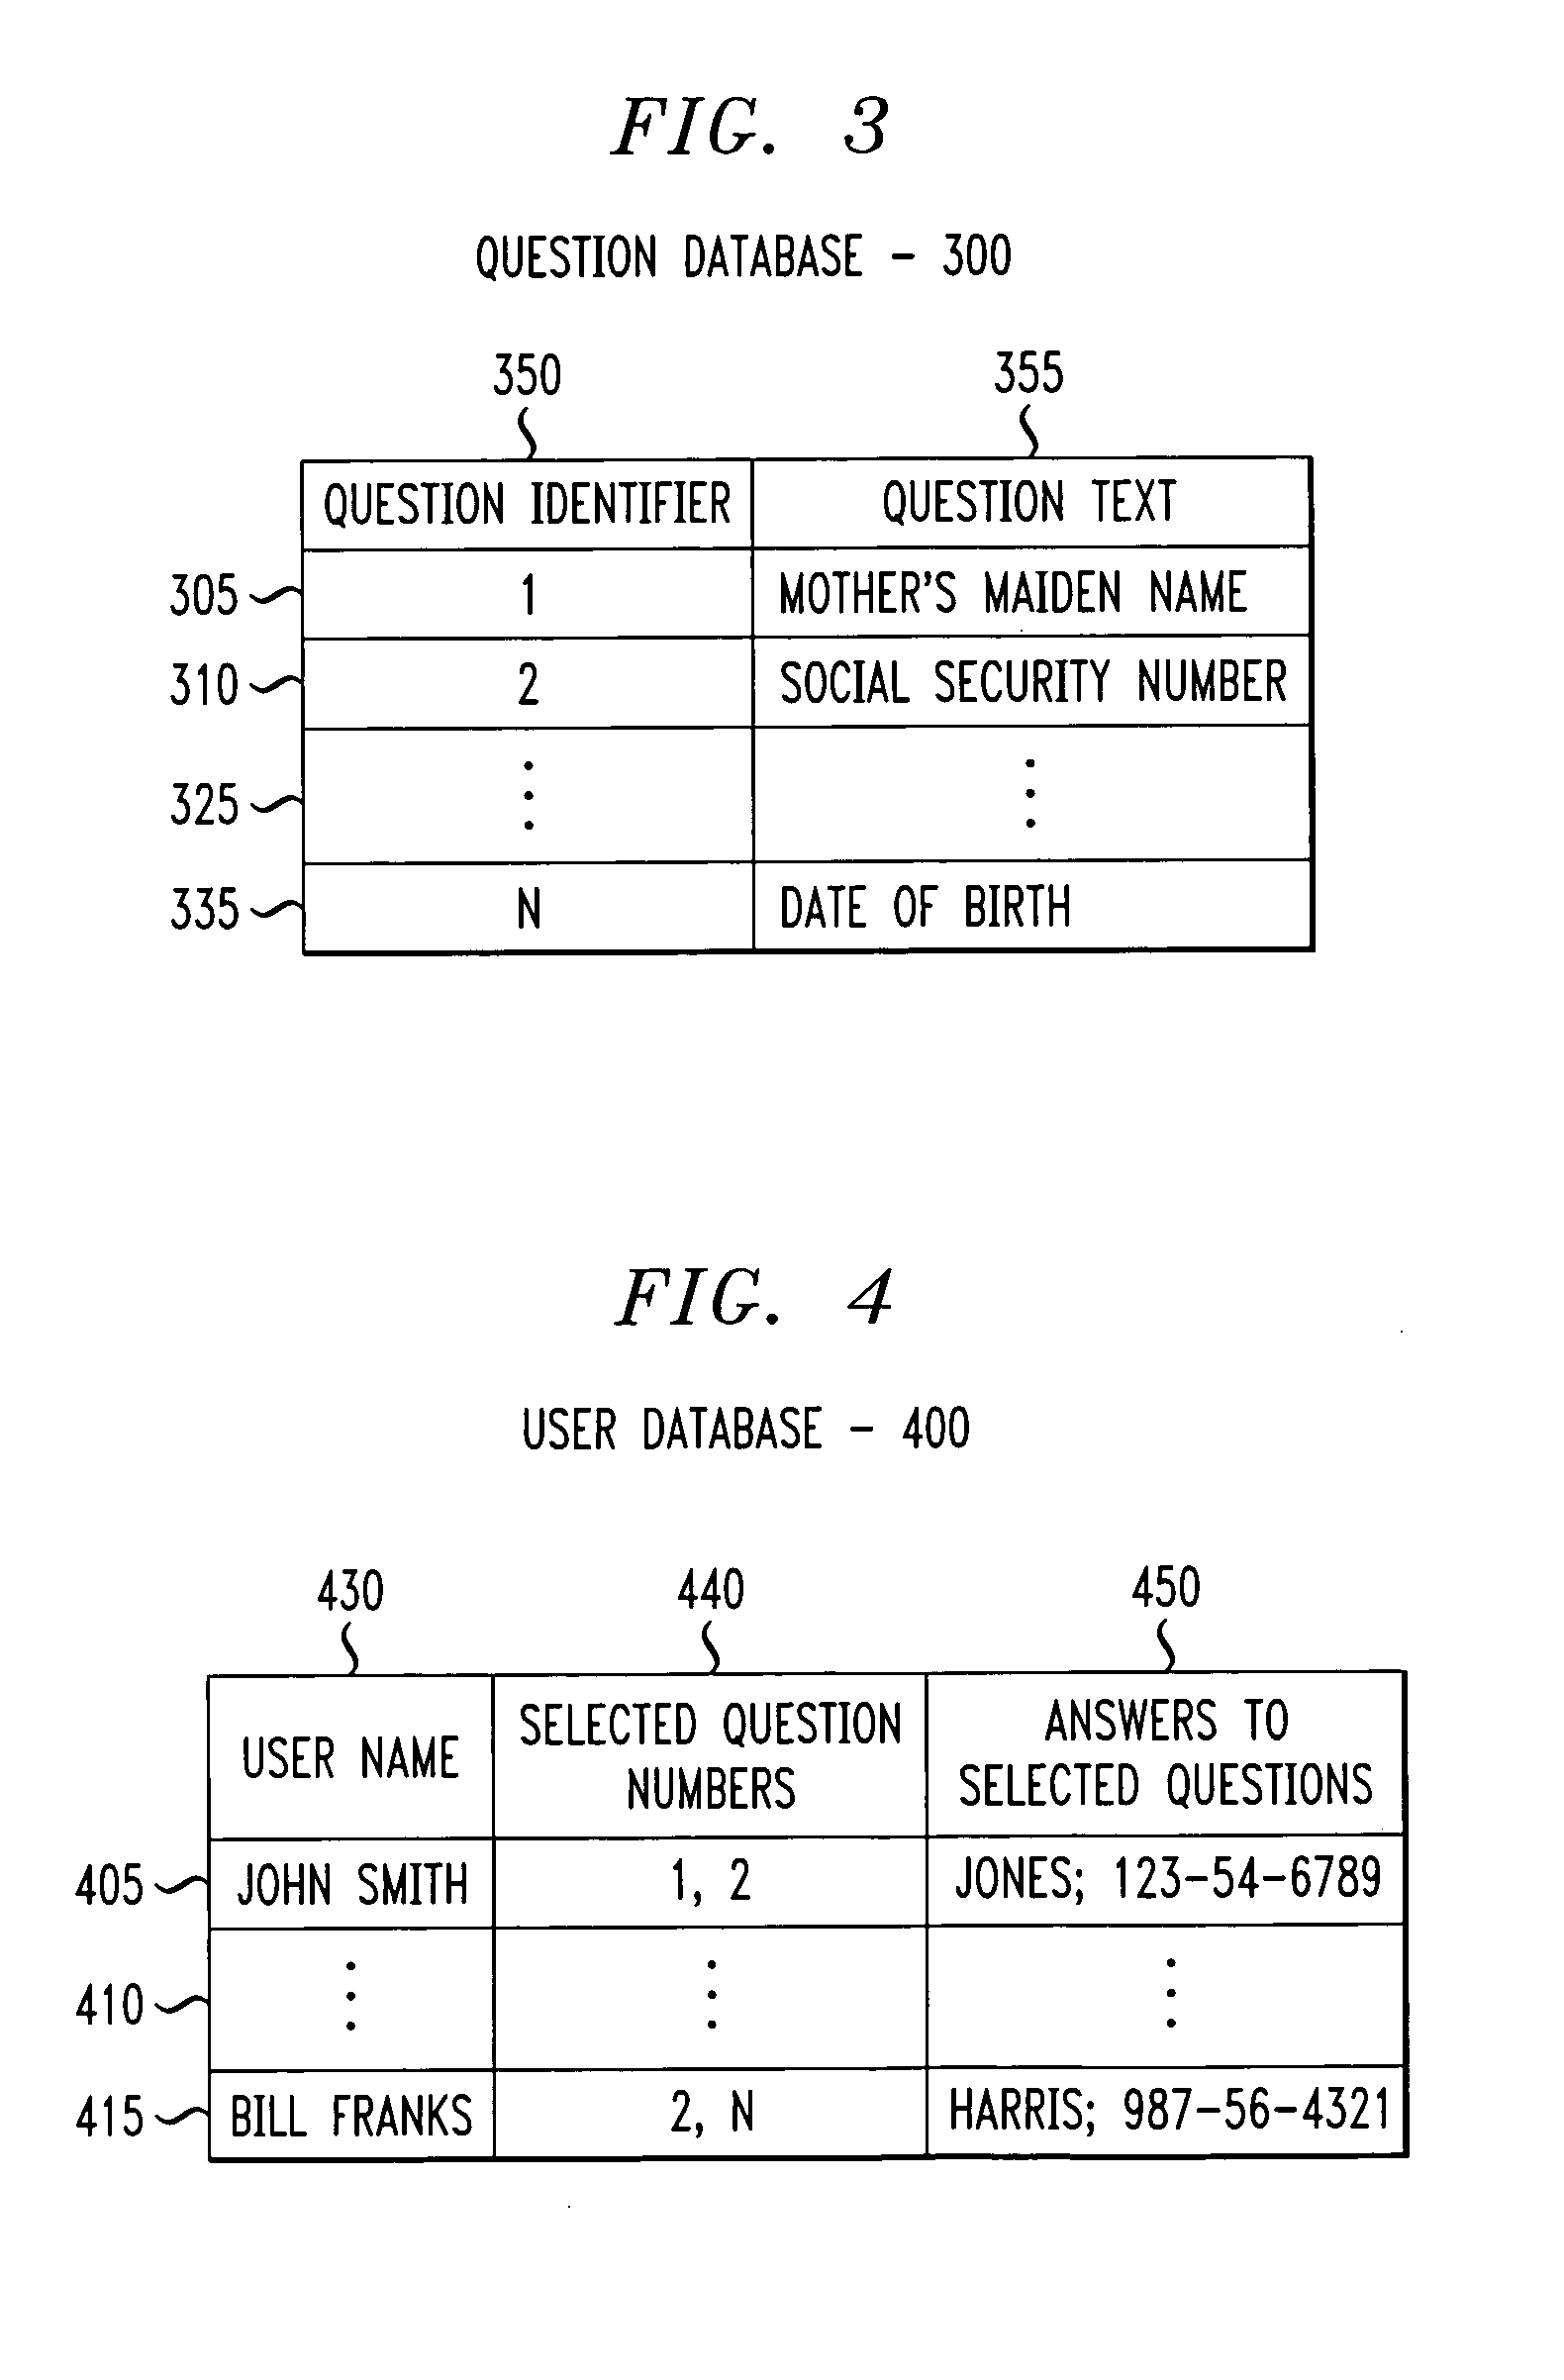 Method and apparatus for authenticating a user using verbal information verification